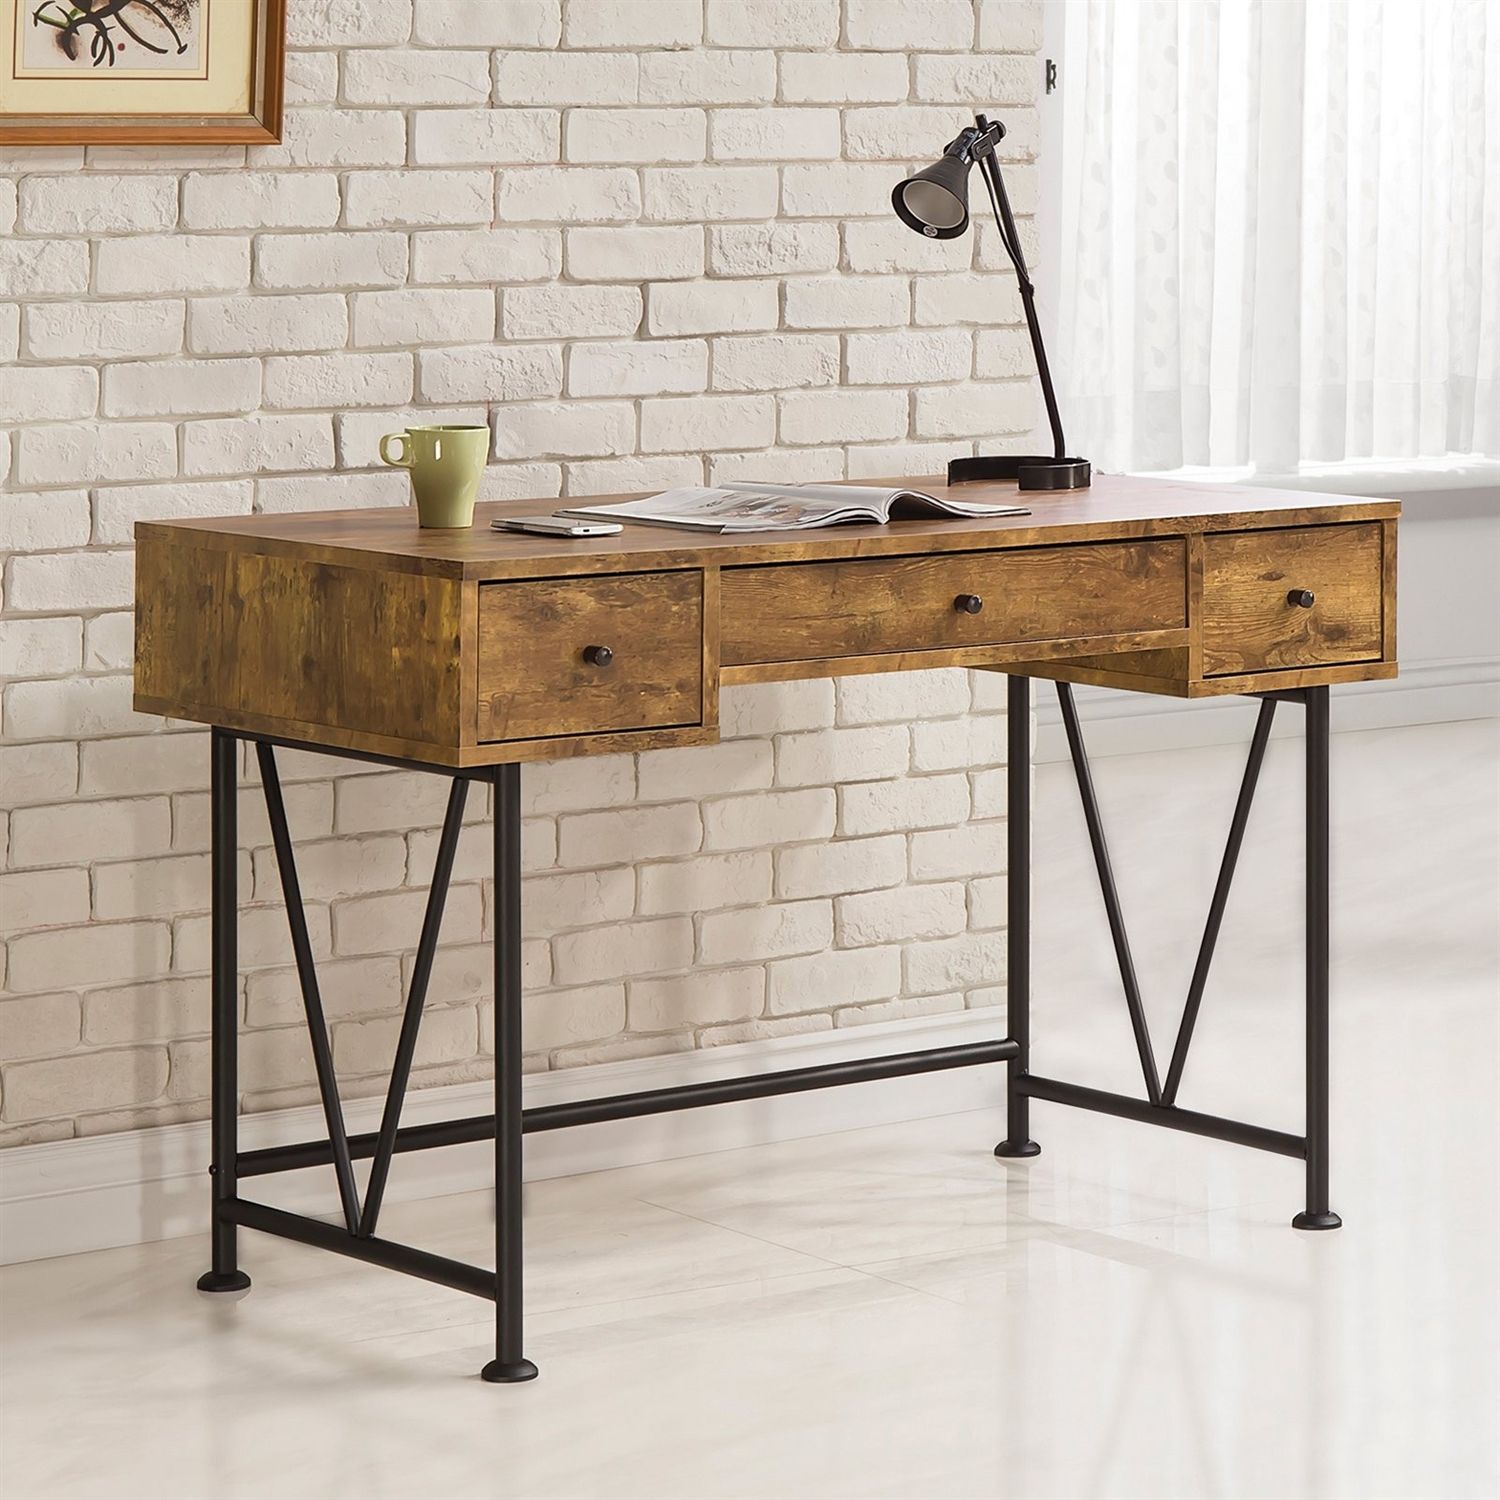 Farmhouse Rustic Home Office 3 Drawer Writing Desk Throughout Rustic Acacia Wooden Writing Desks (View 14 of 15)